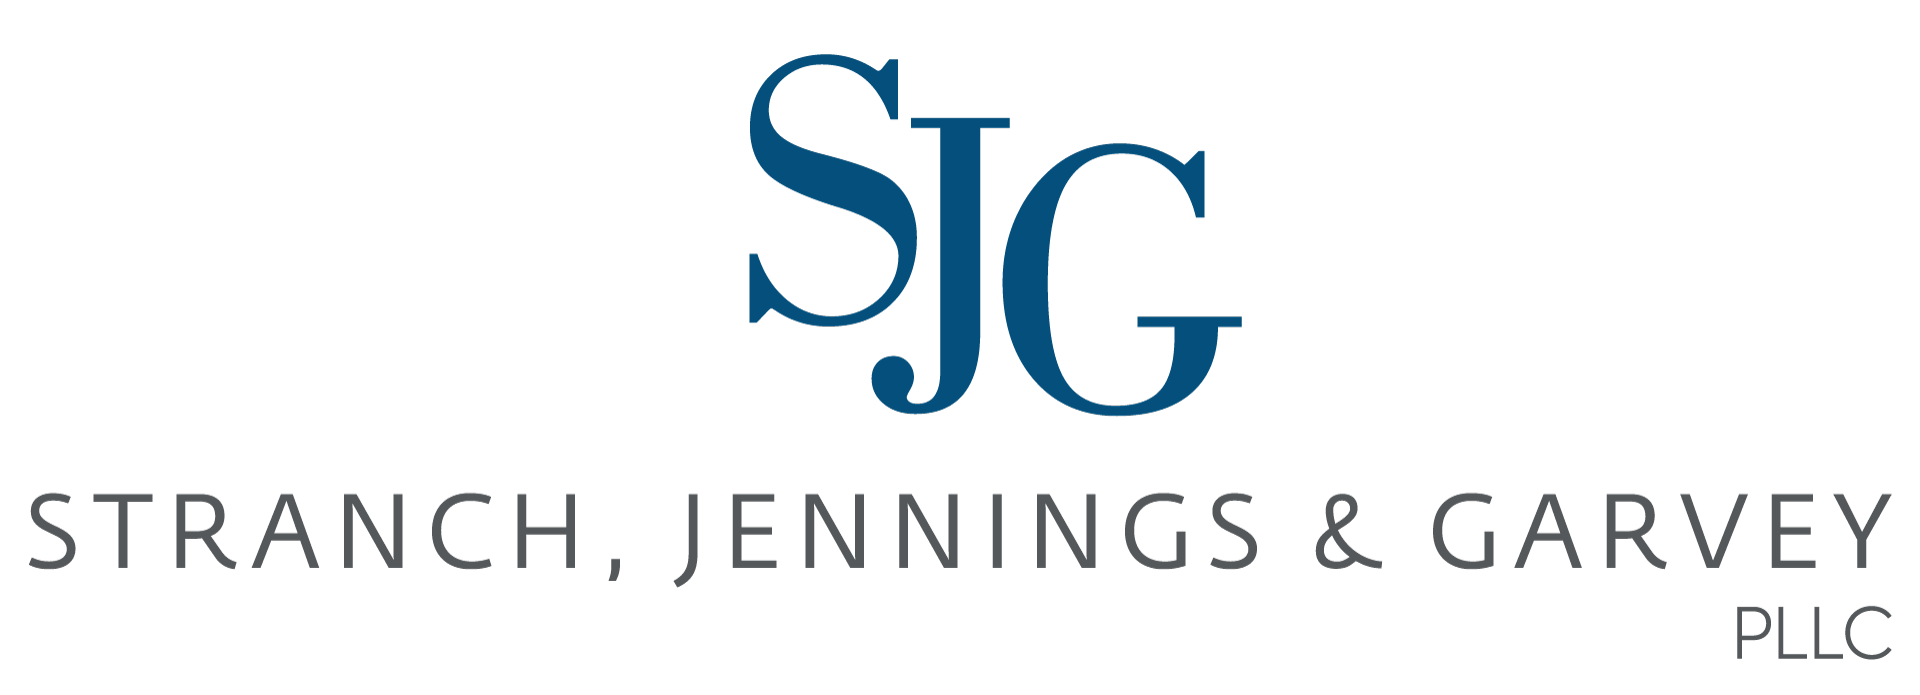 Stranch Jennings and Garvey law firm logo